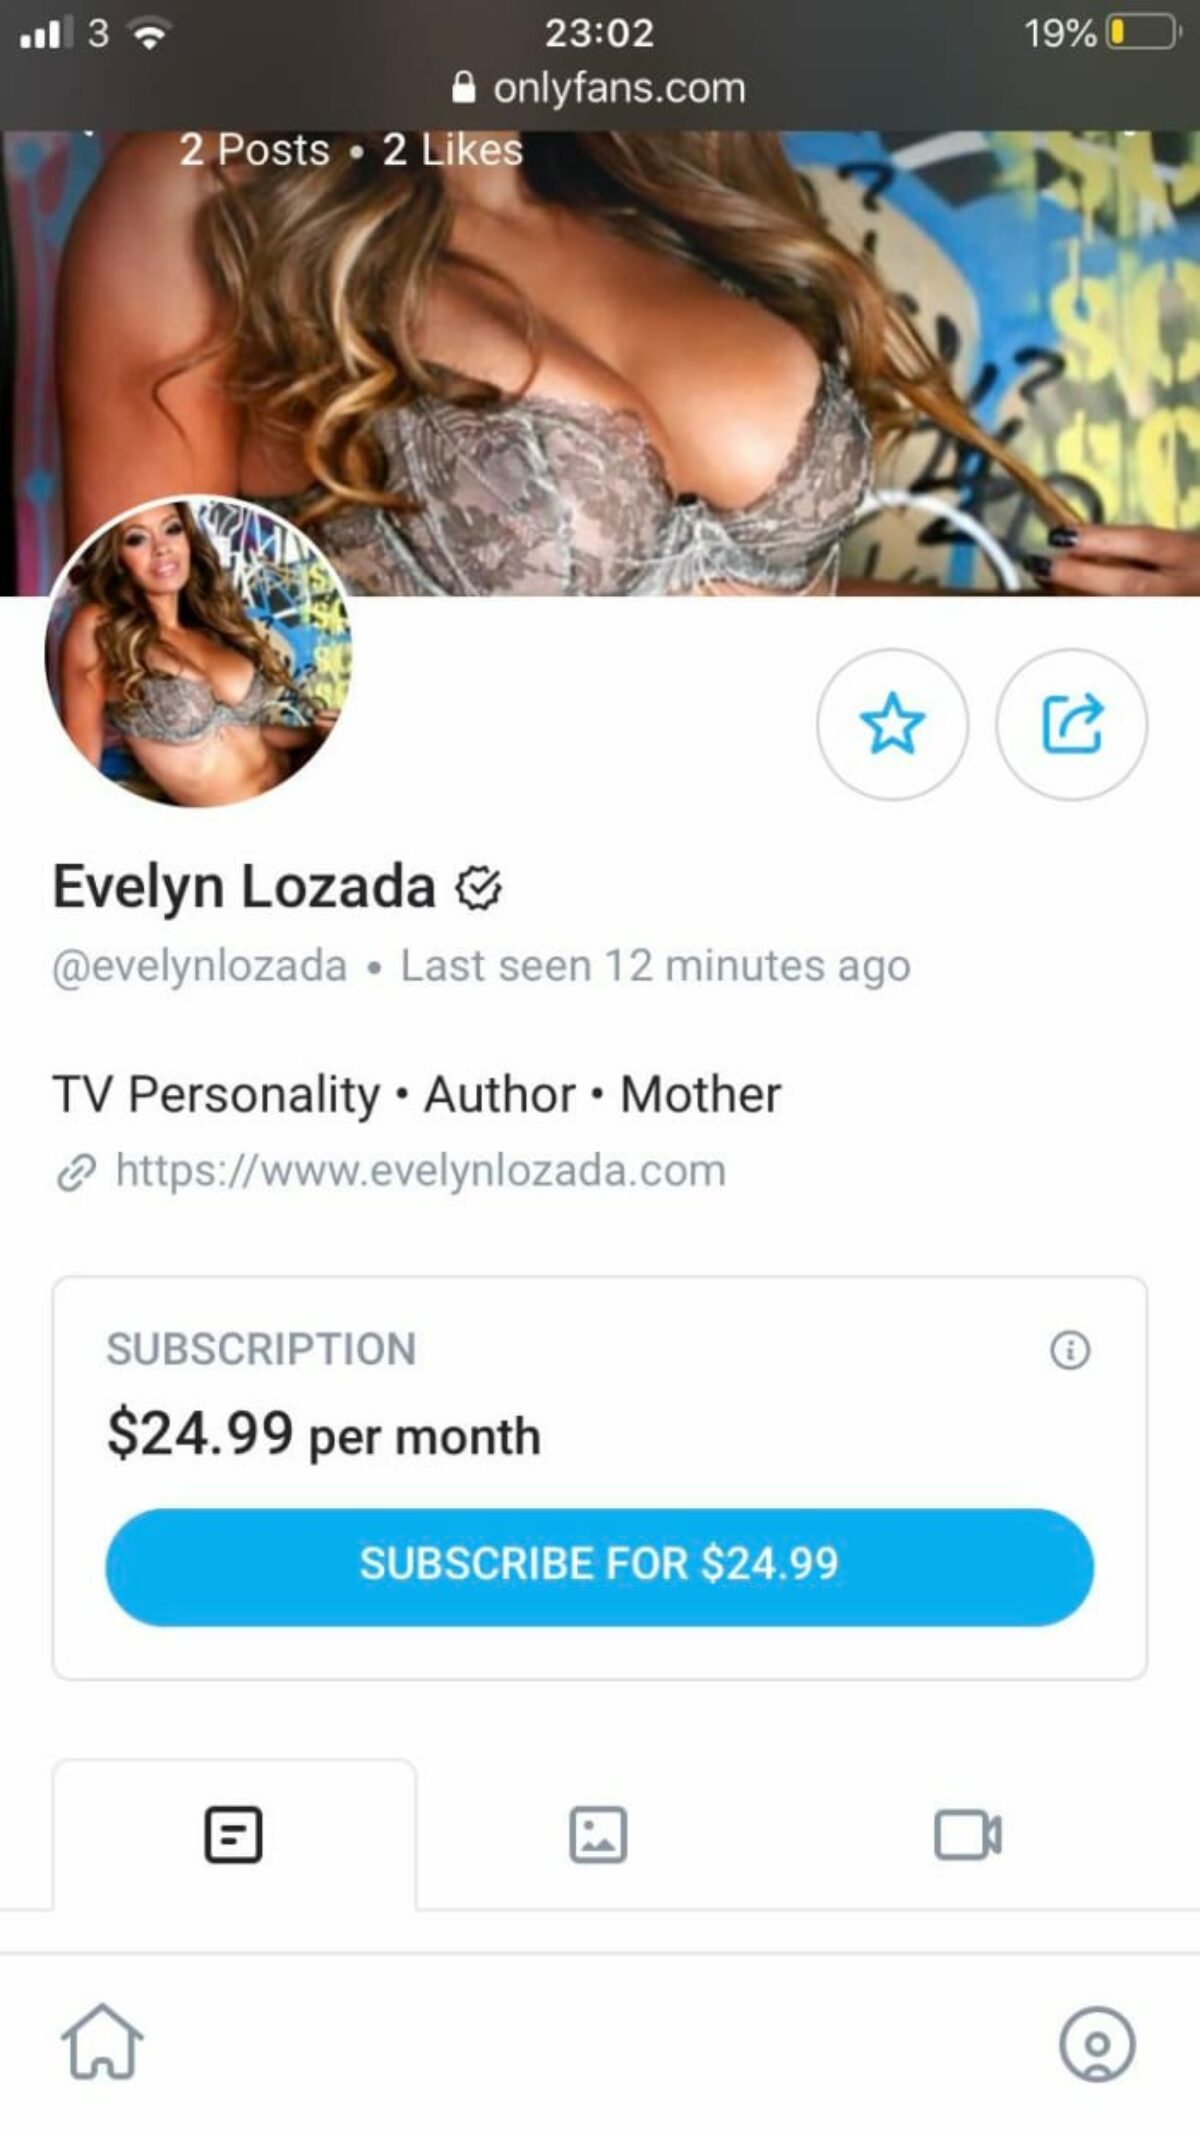 Only fans lozada evelyn LINKS Evelyn